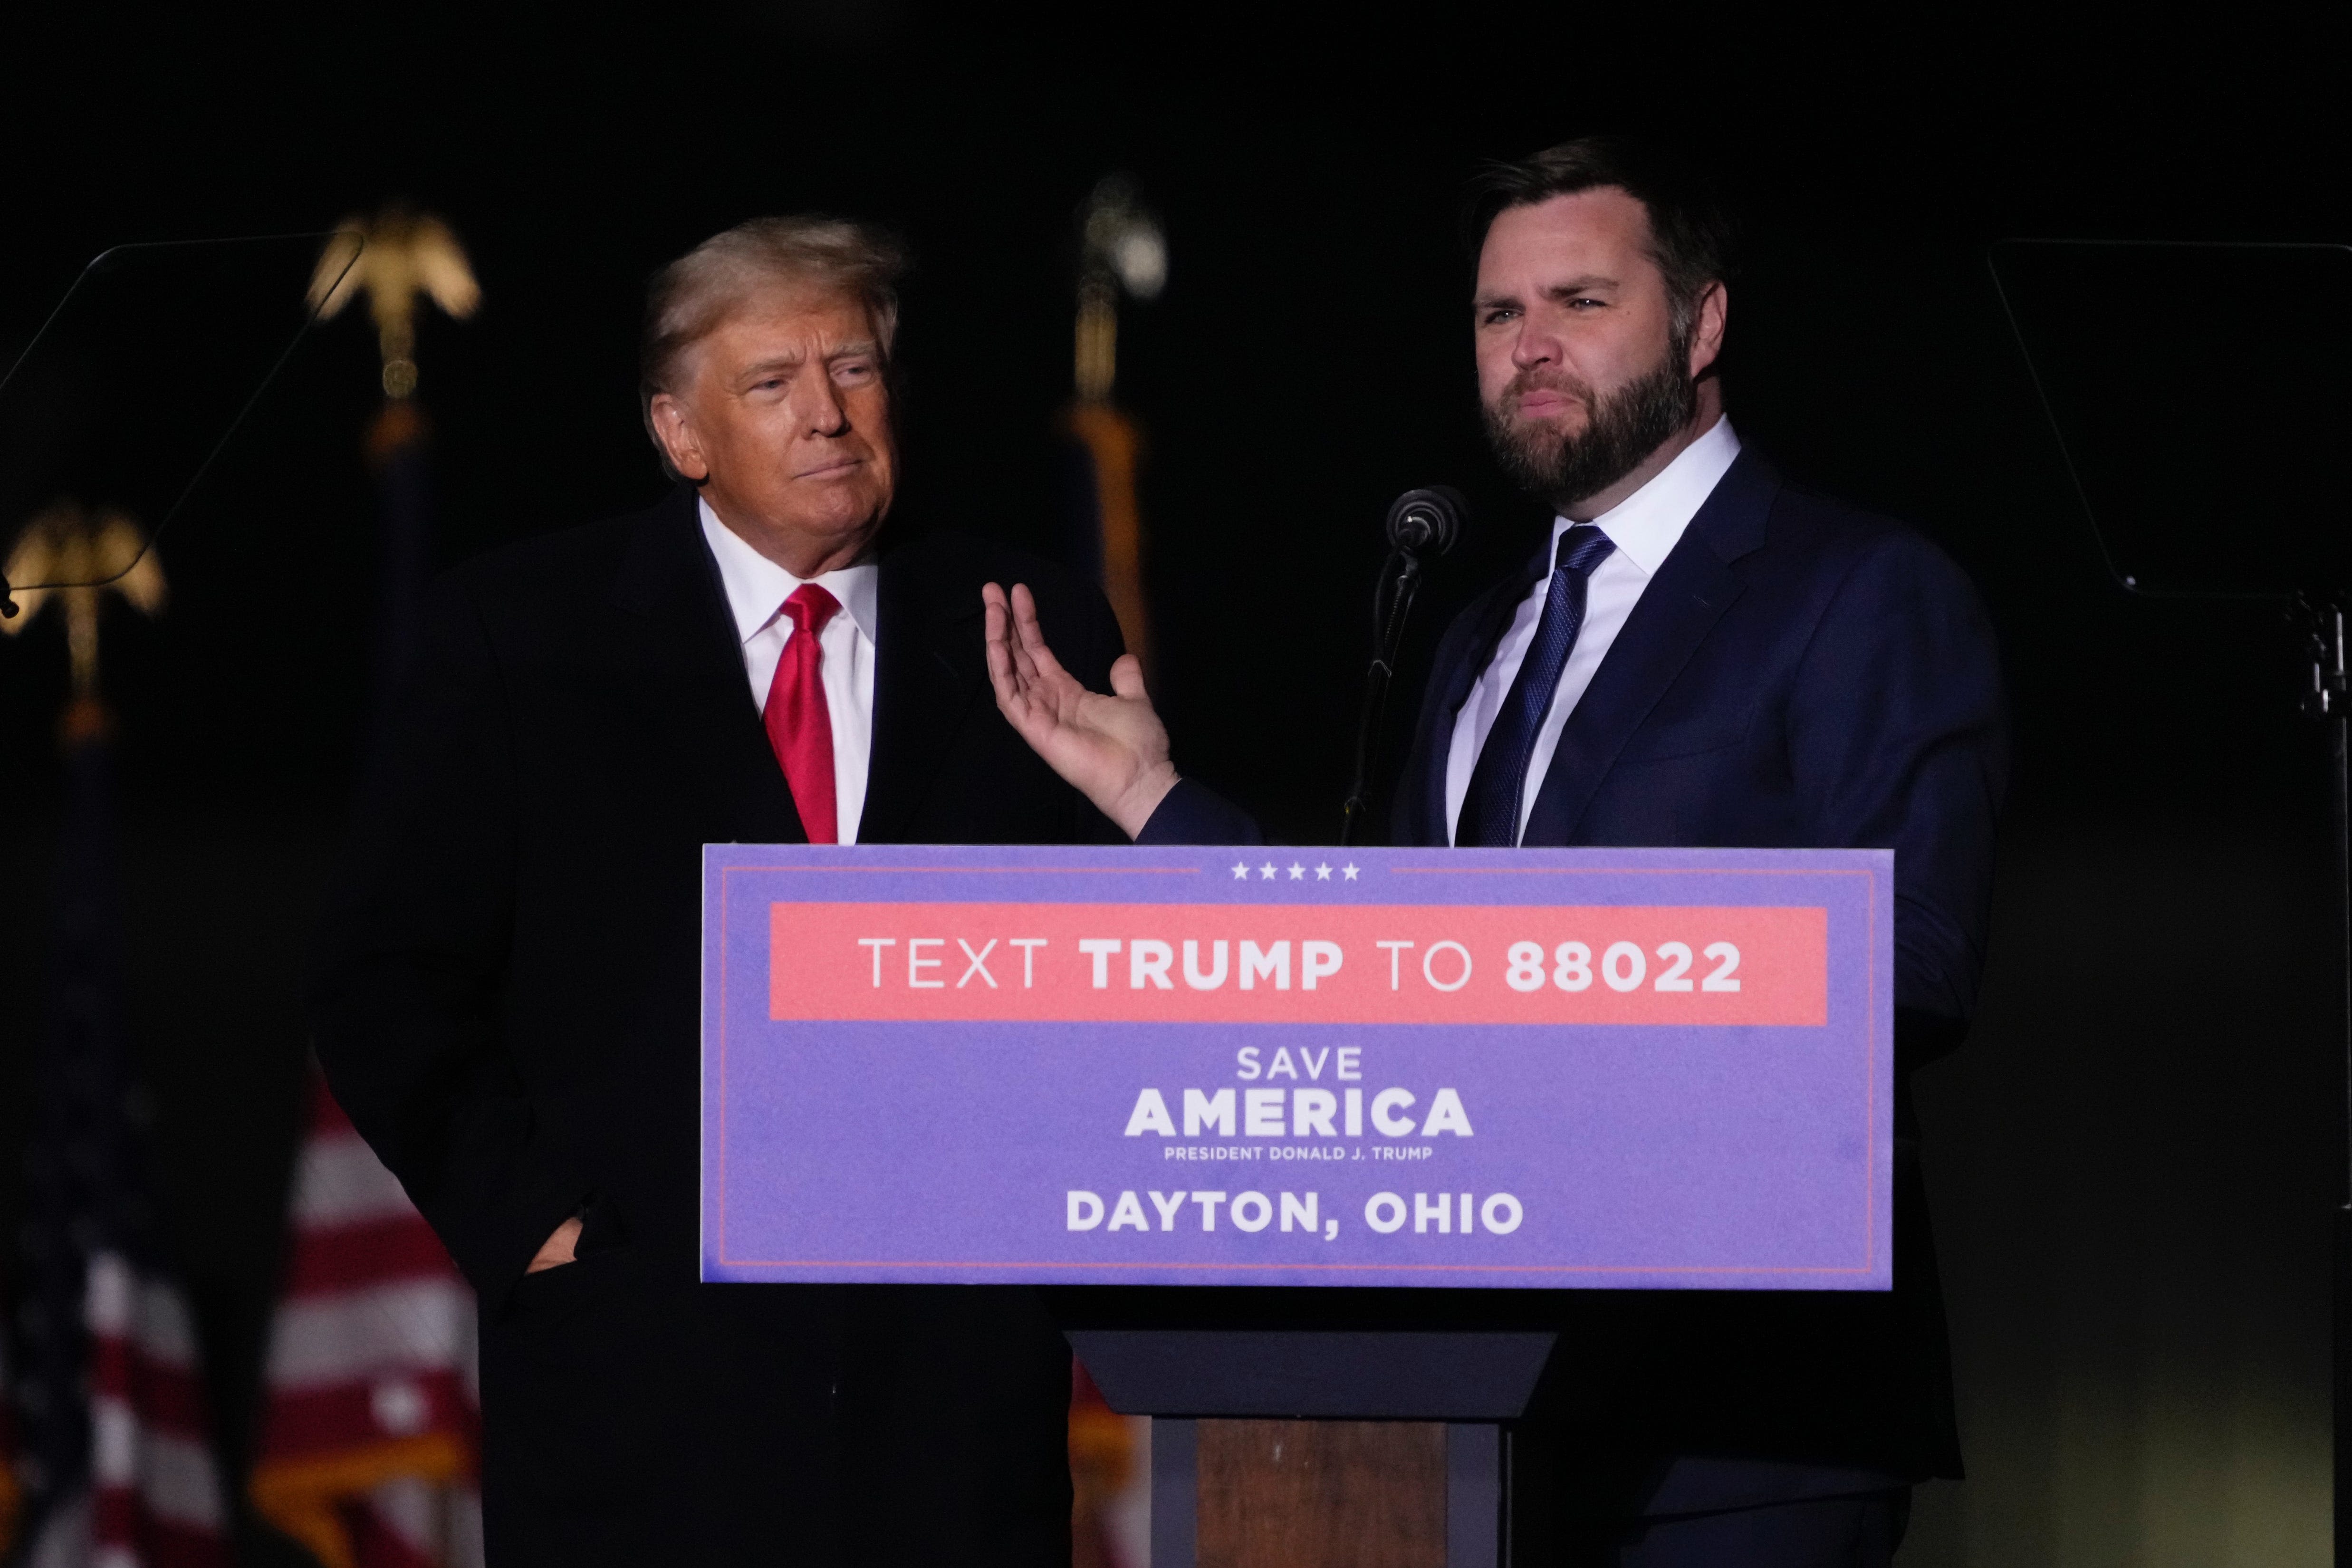 J.D. Vance possesses the quality Trump values most in a VP pick - spinelessness | Opinion